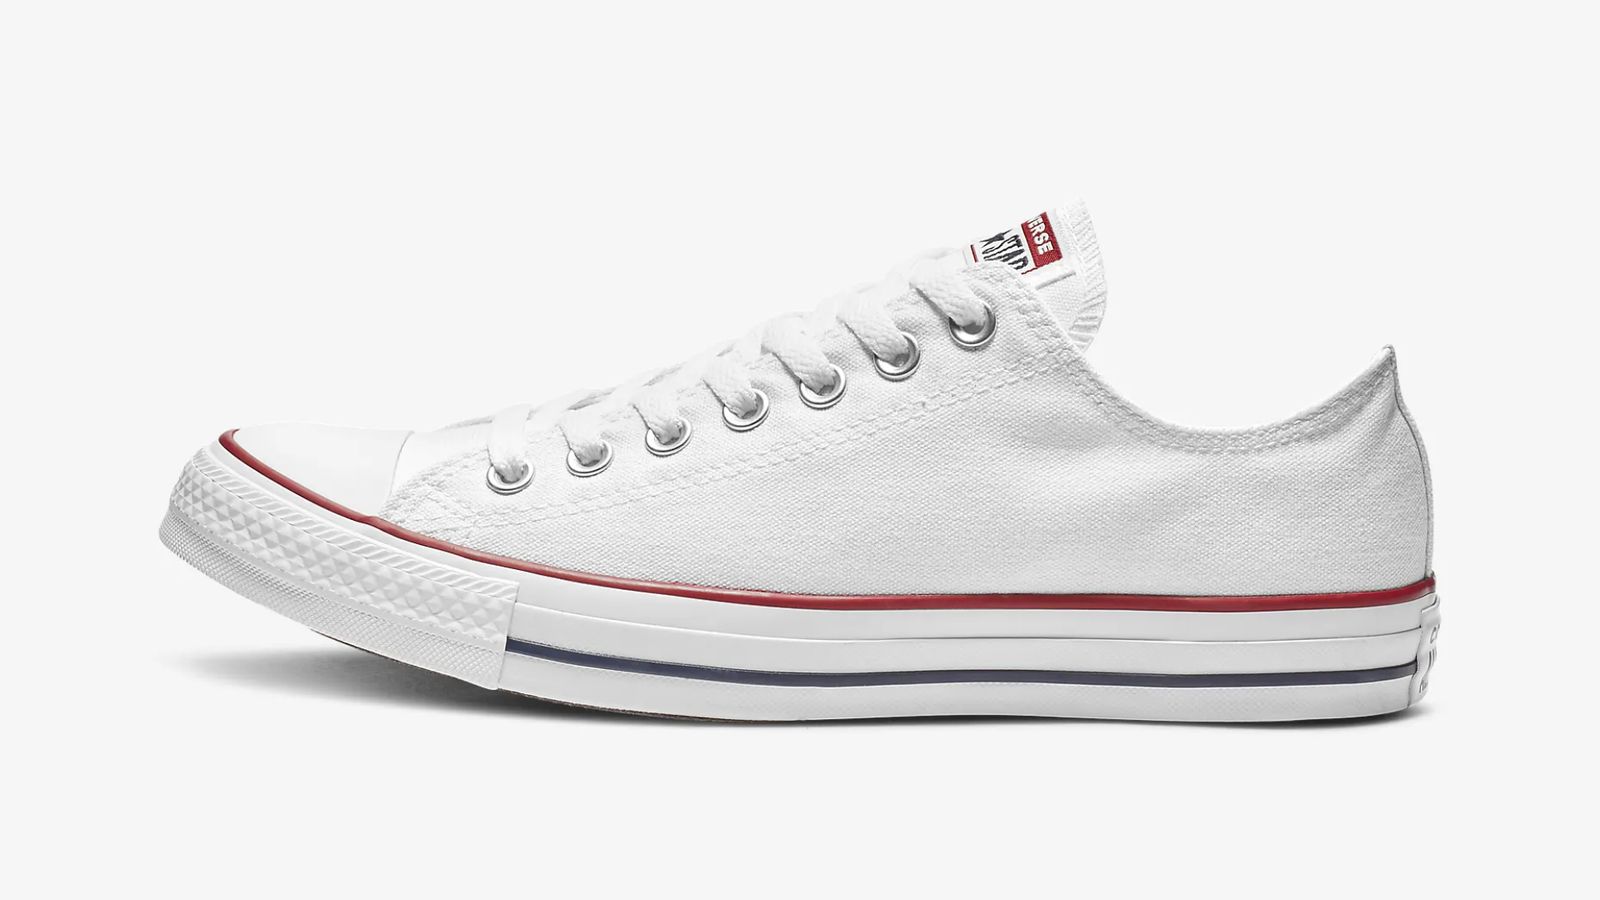 How To Lace Converse Shoes: Top picks